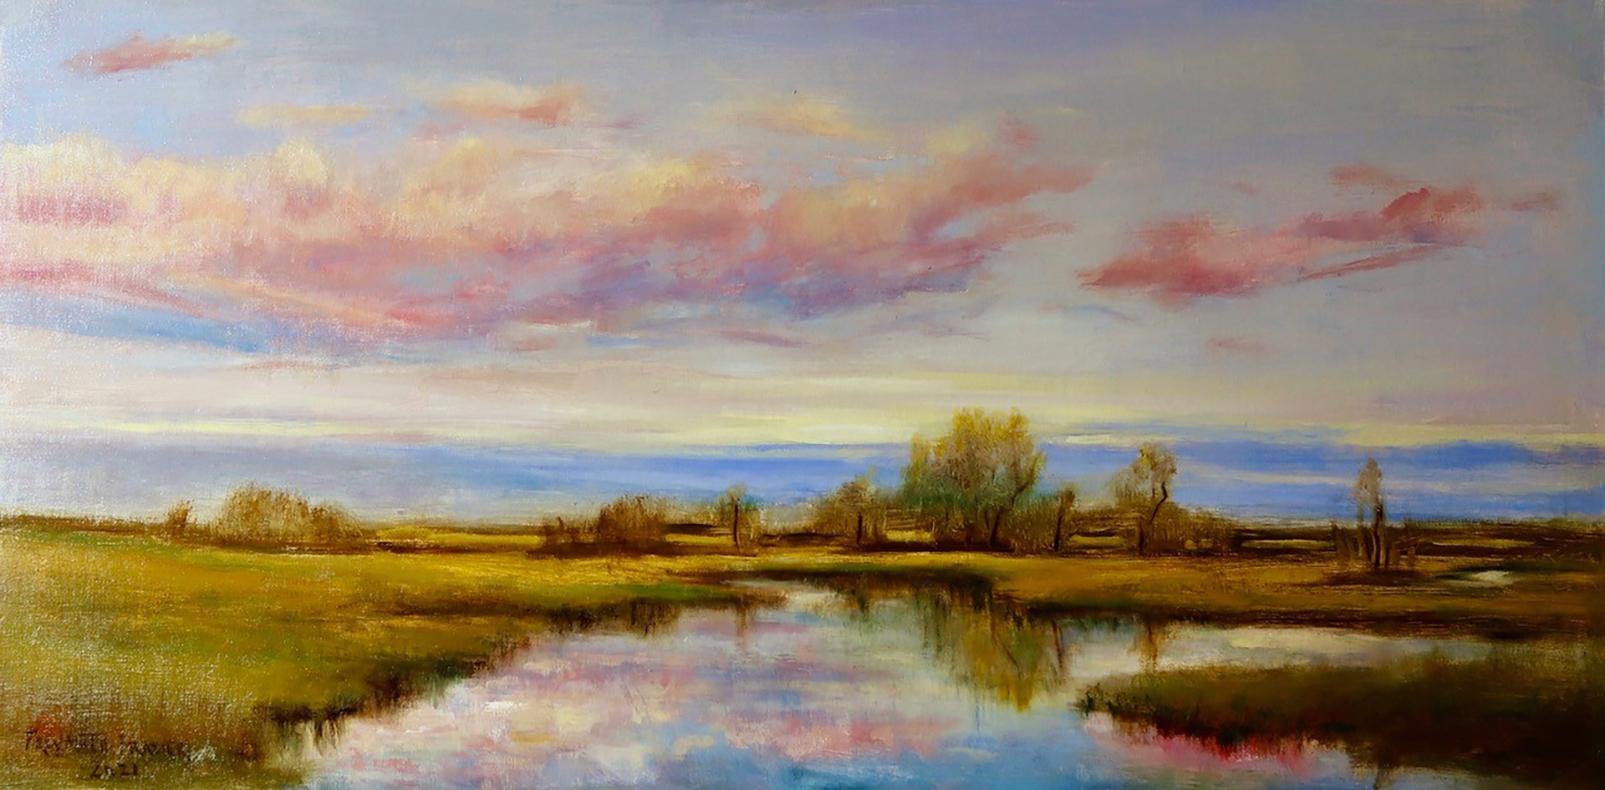 Rose Freymuth-Frazier Landscape Painting - Promise of Spring, Reflective Sky in Pink, Blue, and Gold Tones, Original Oil 